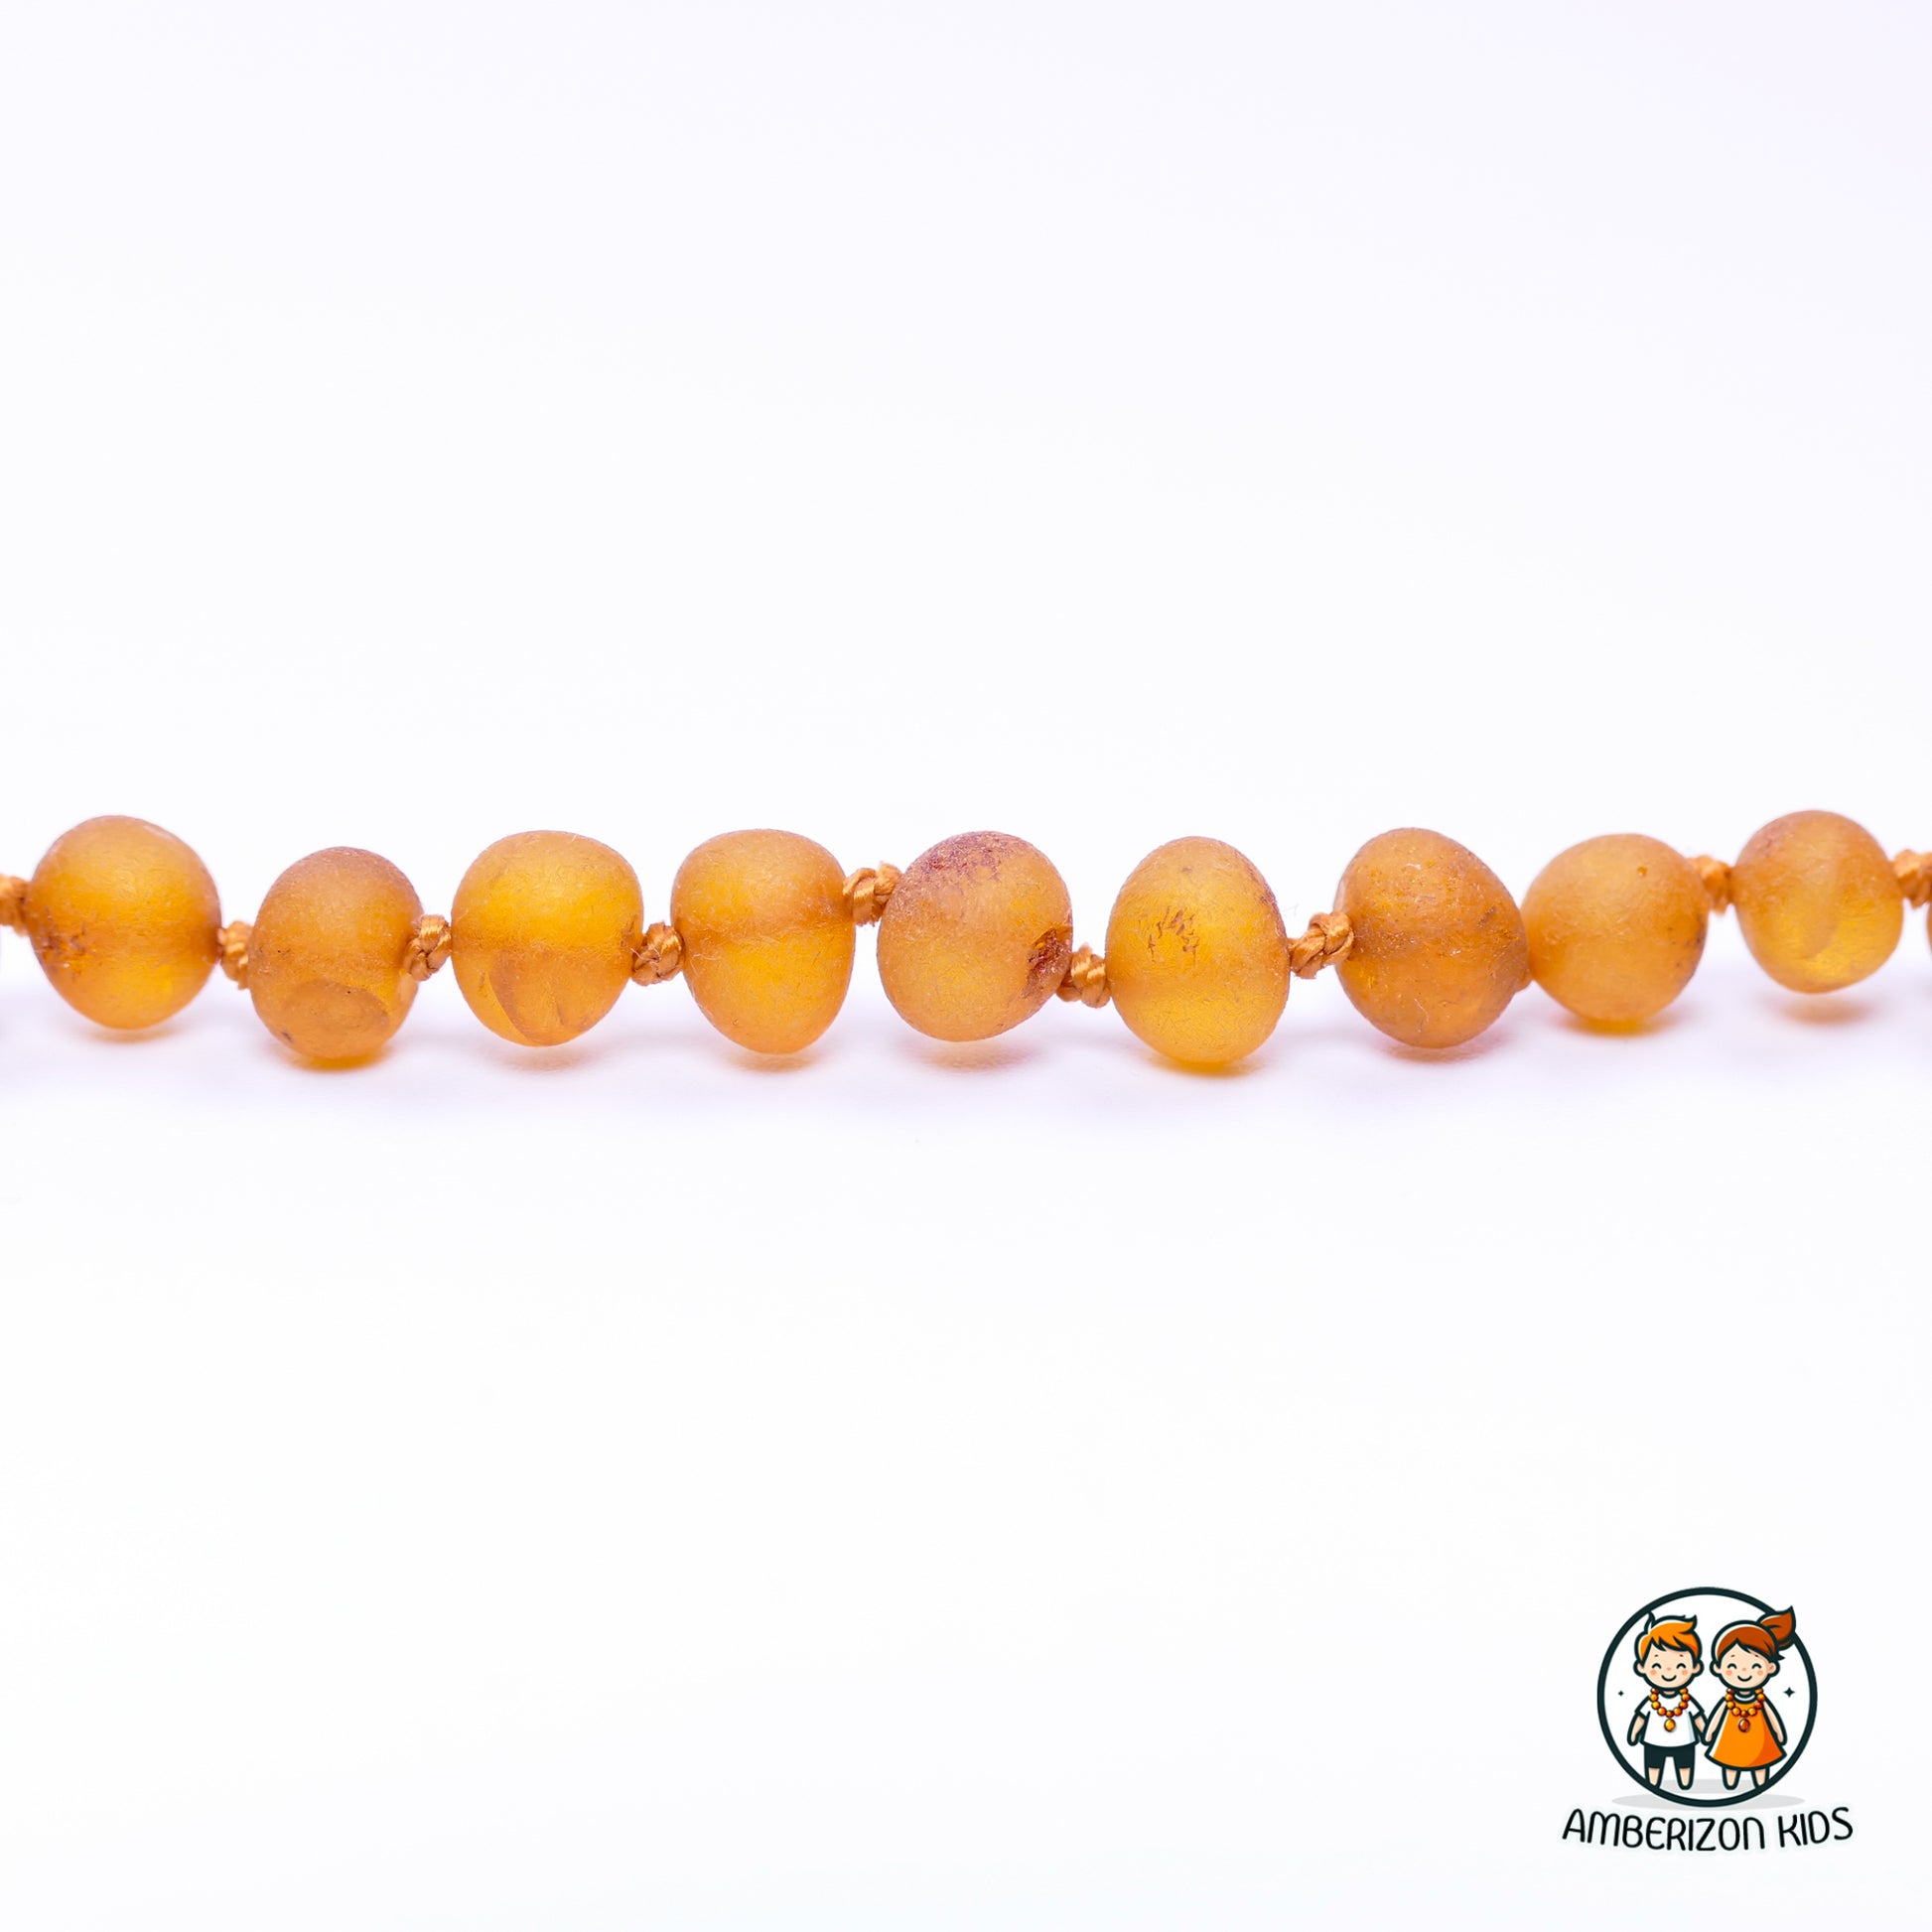 "Warmth of Amber Teething Necklace - Unisex Appeal - Premium Raw Amber with a Frosted Finish